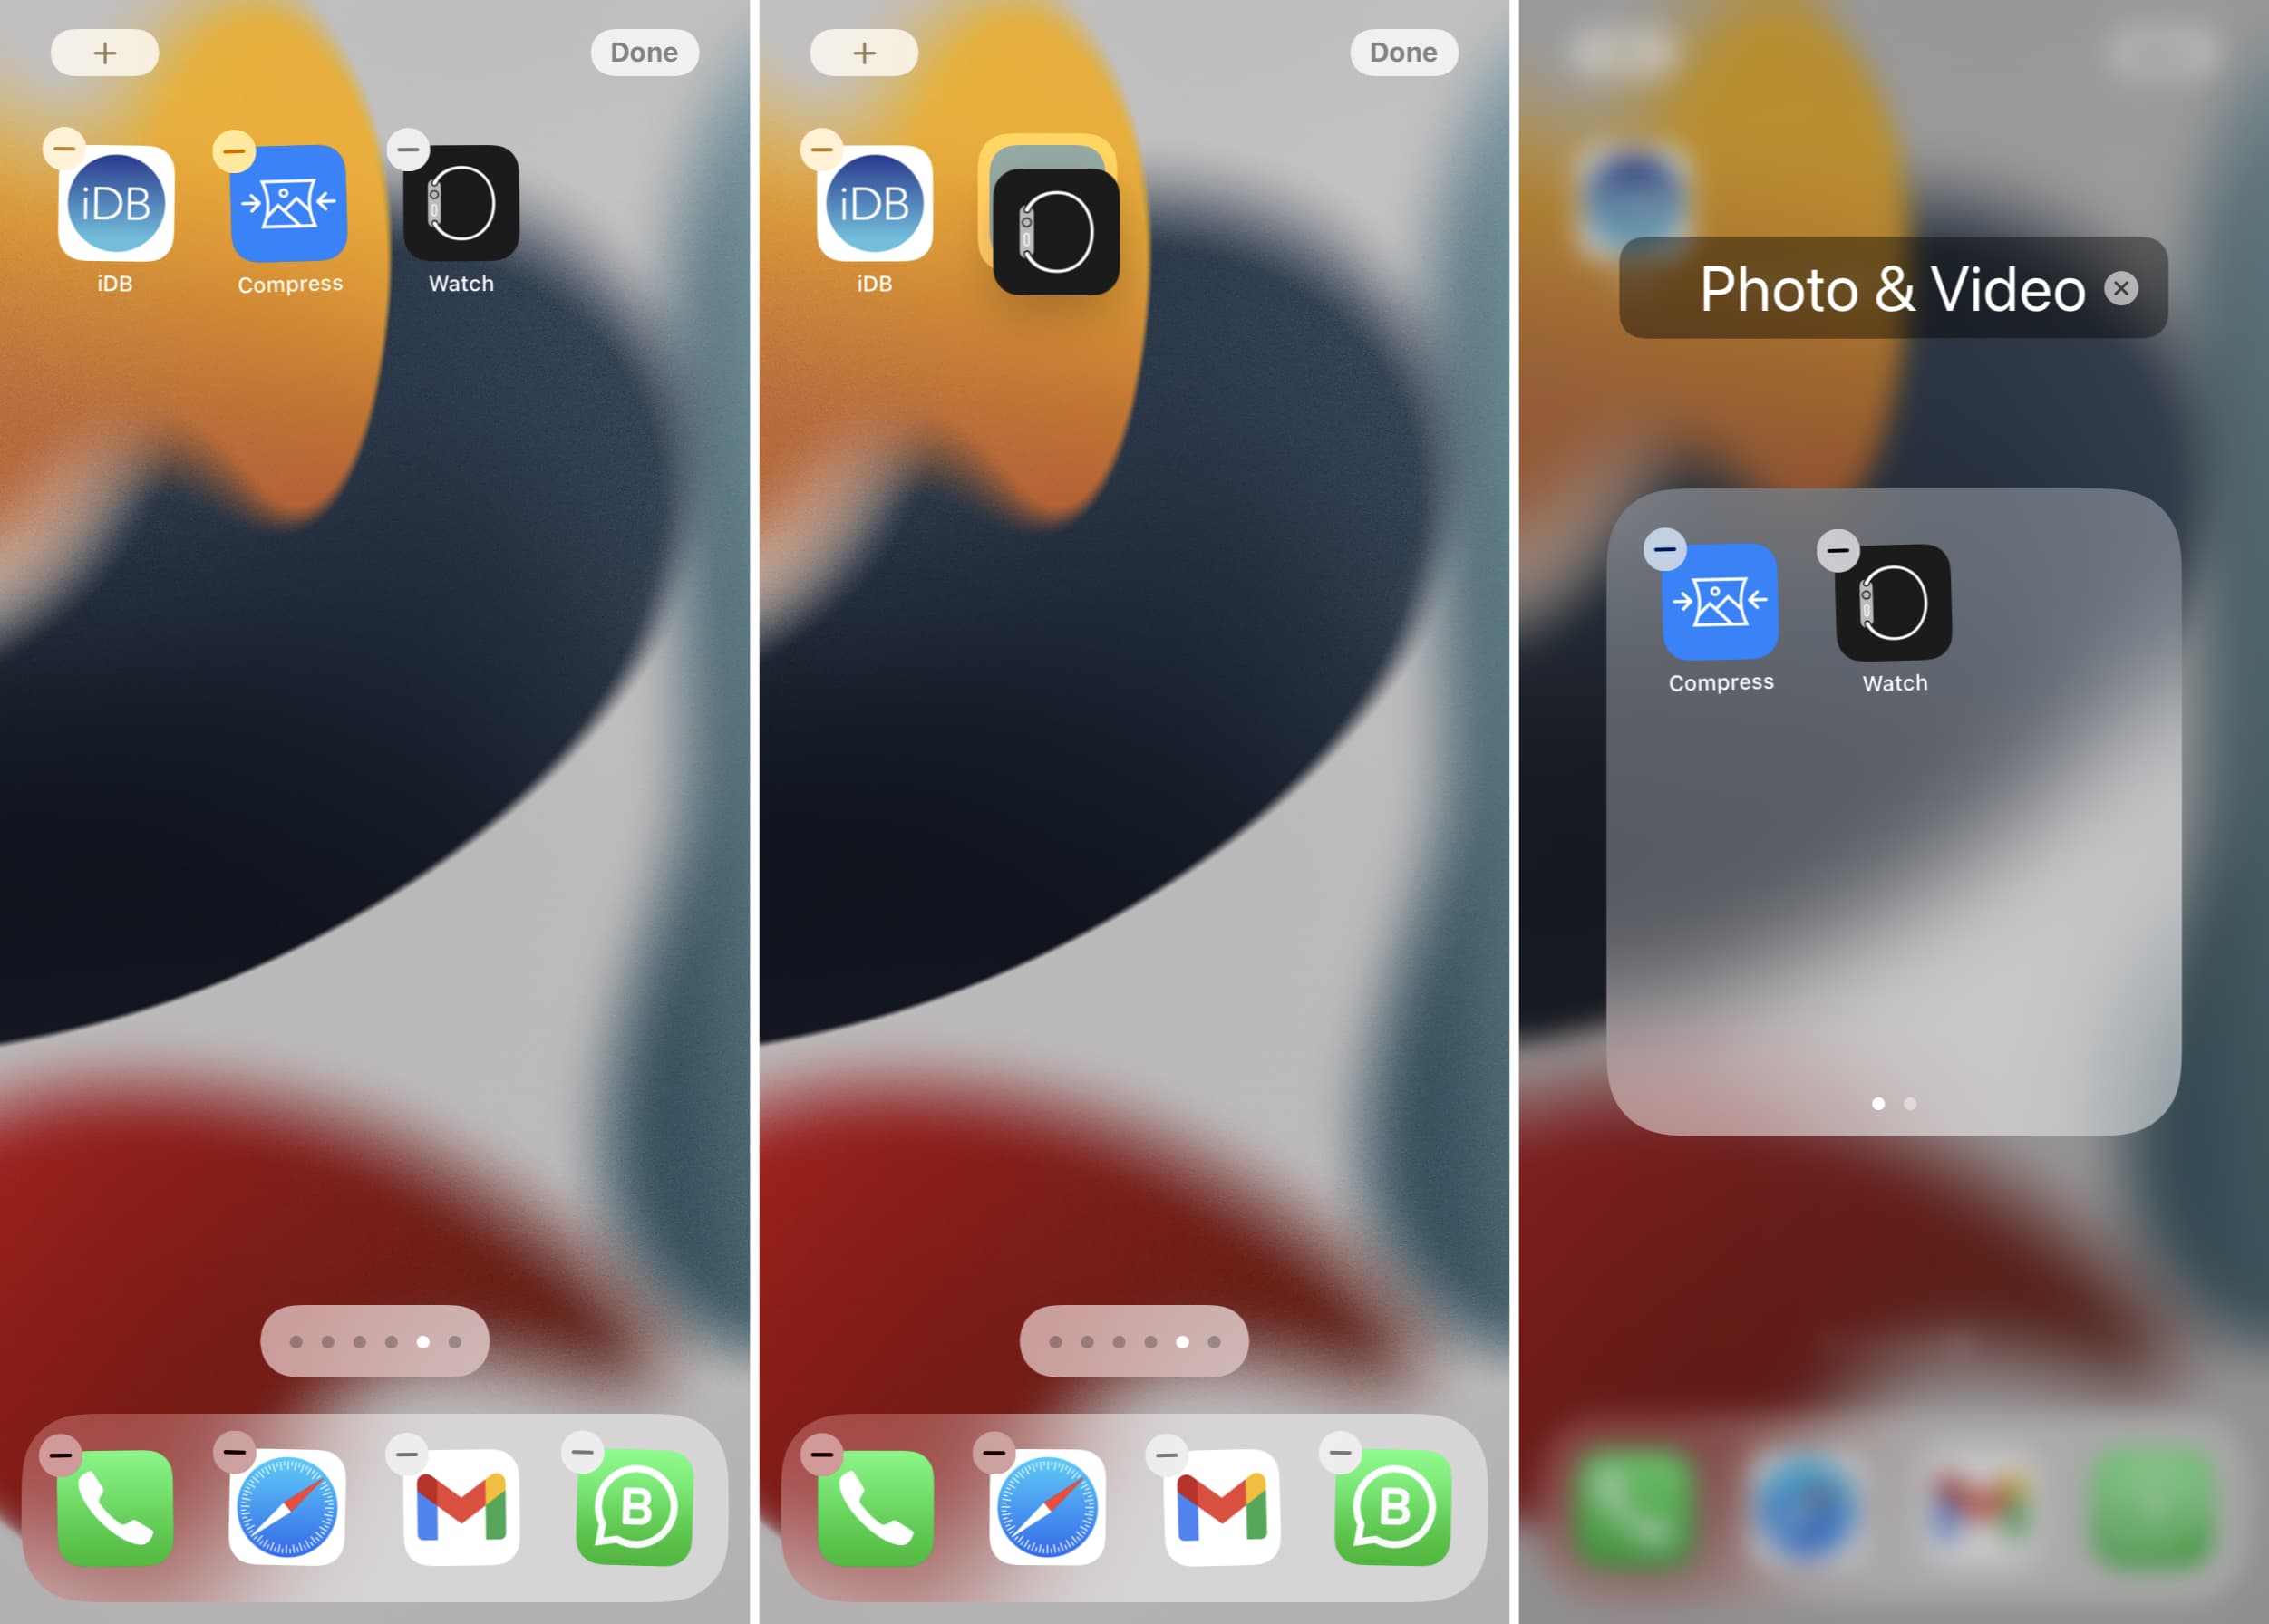 Showing how to create new folder on iPhone Home Screen